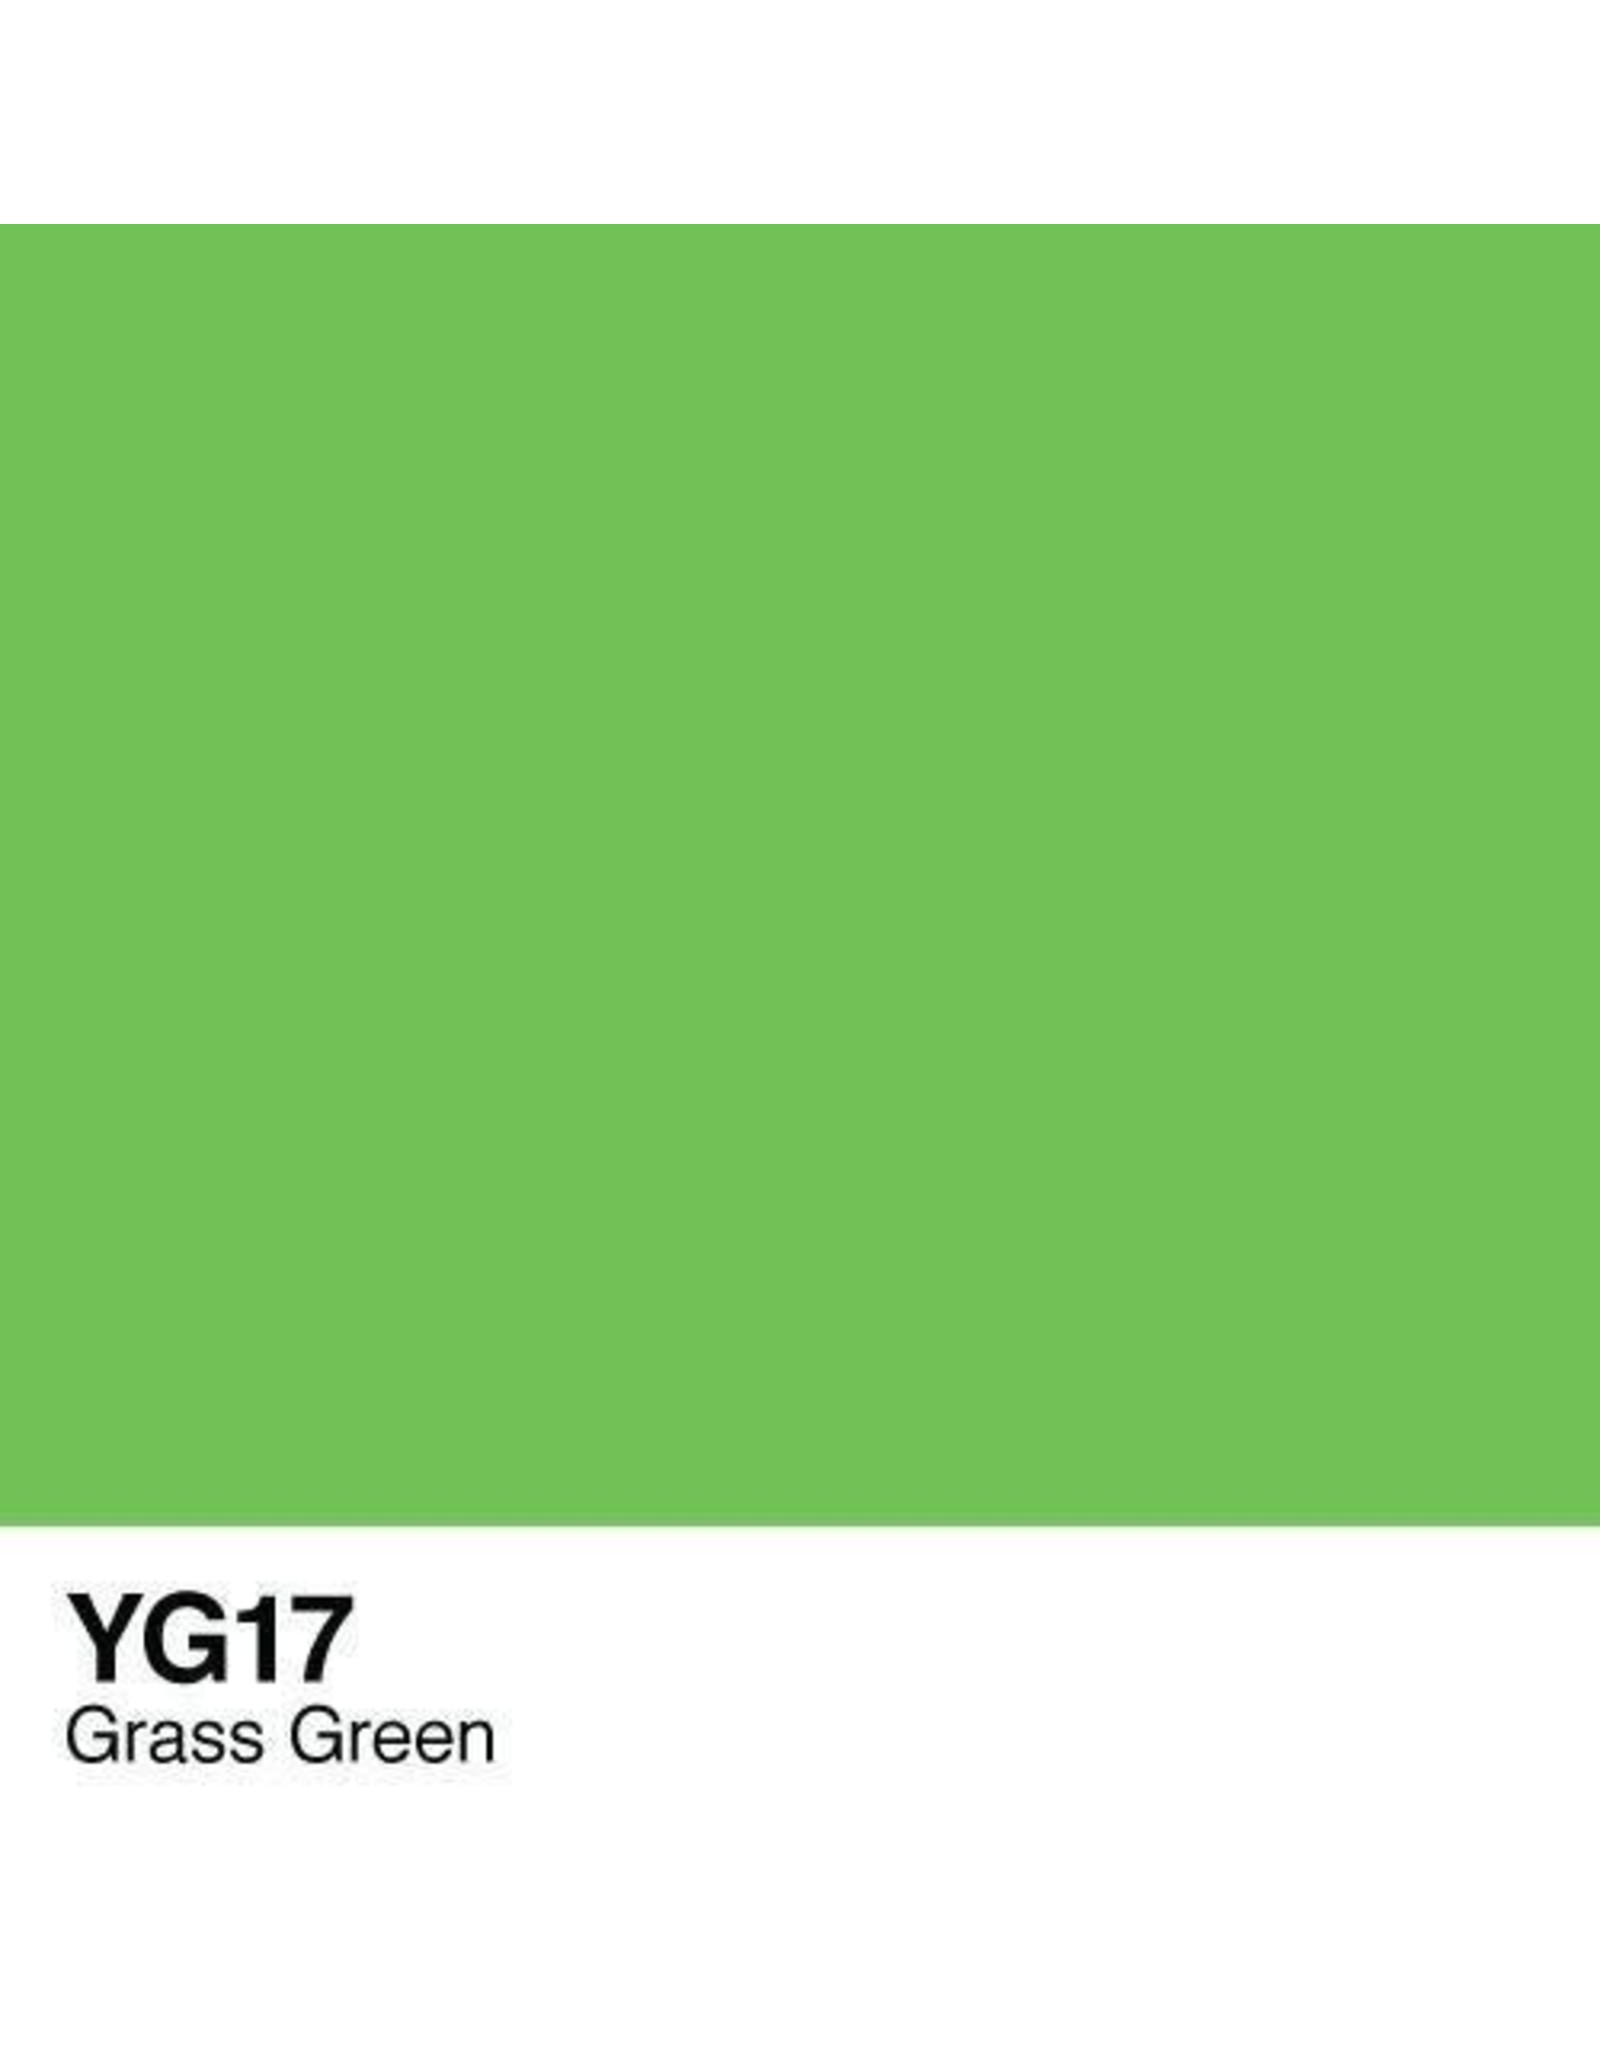 COPIC COPIC YG17 GRASS GREEN SKETCH MARKER